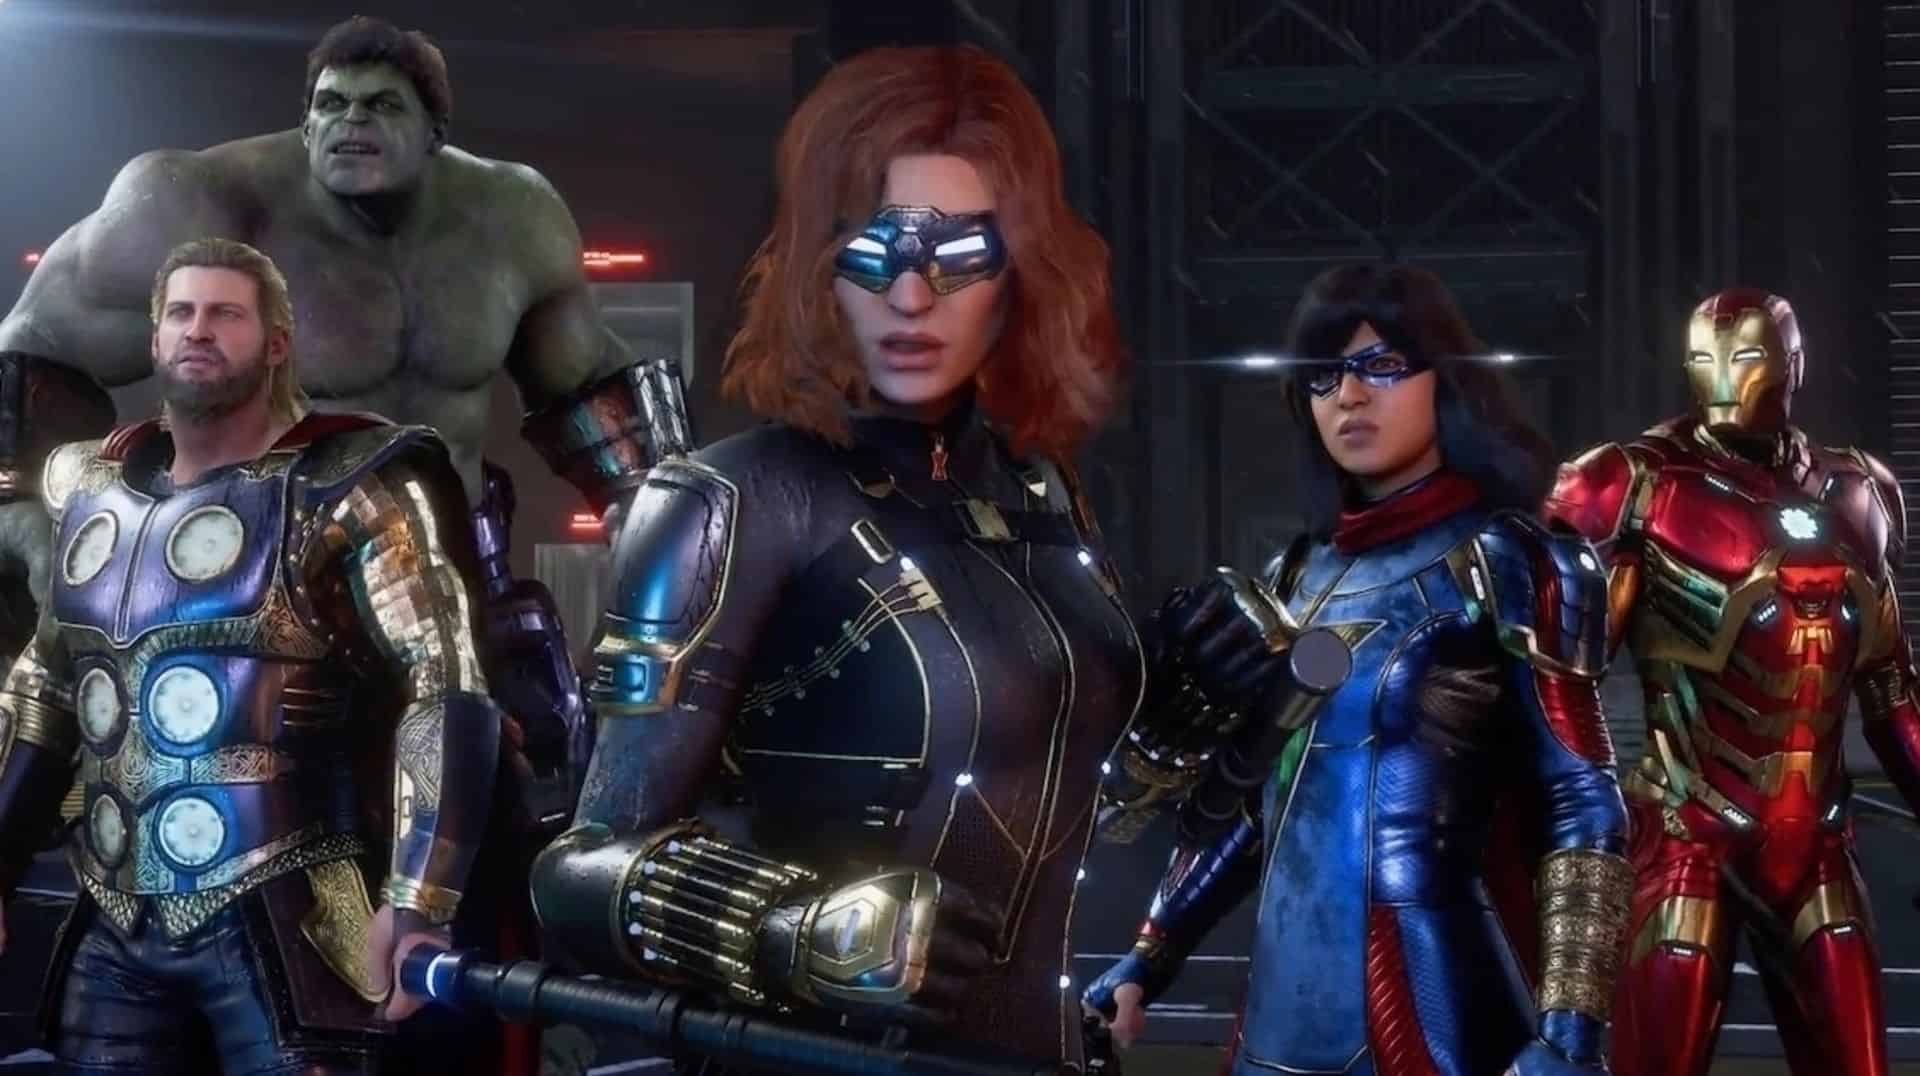 Marvel’s Avengers gets updated with DLSS support on PC